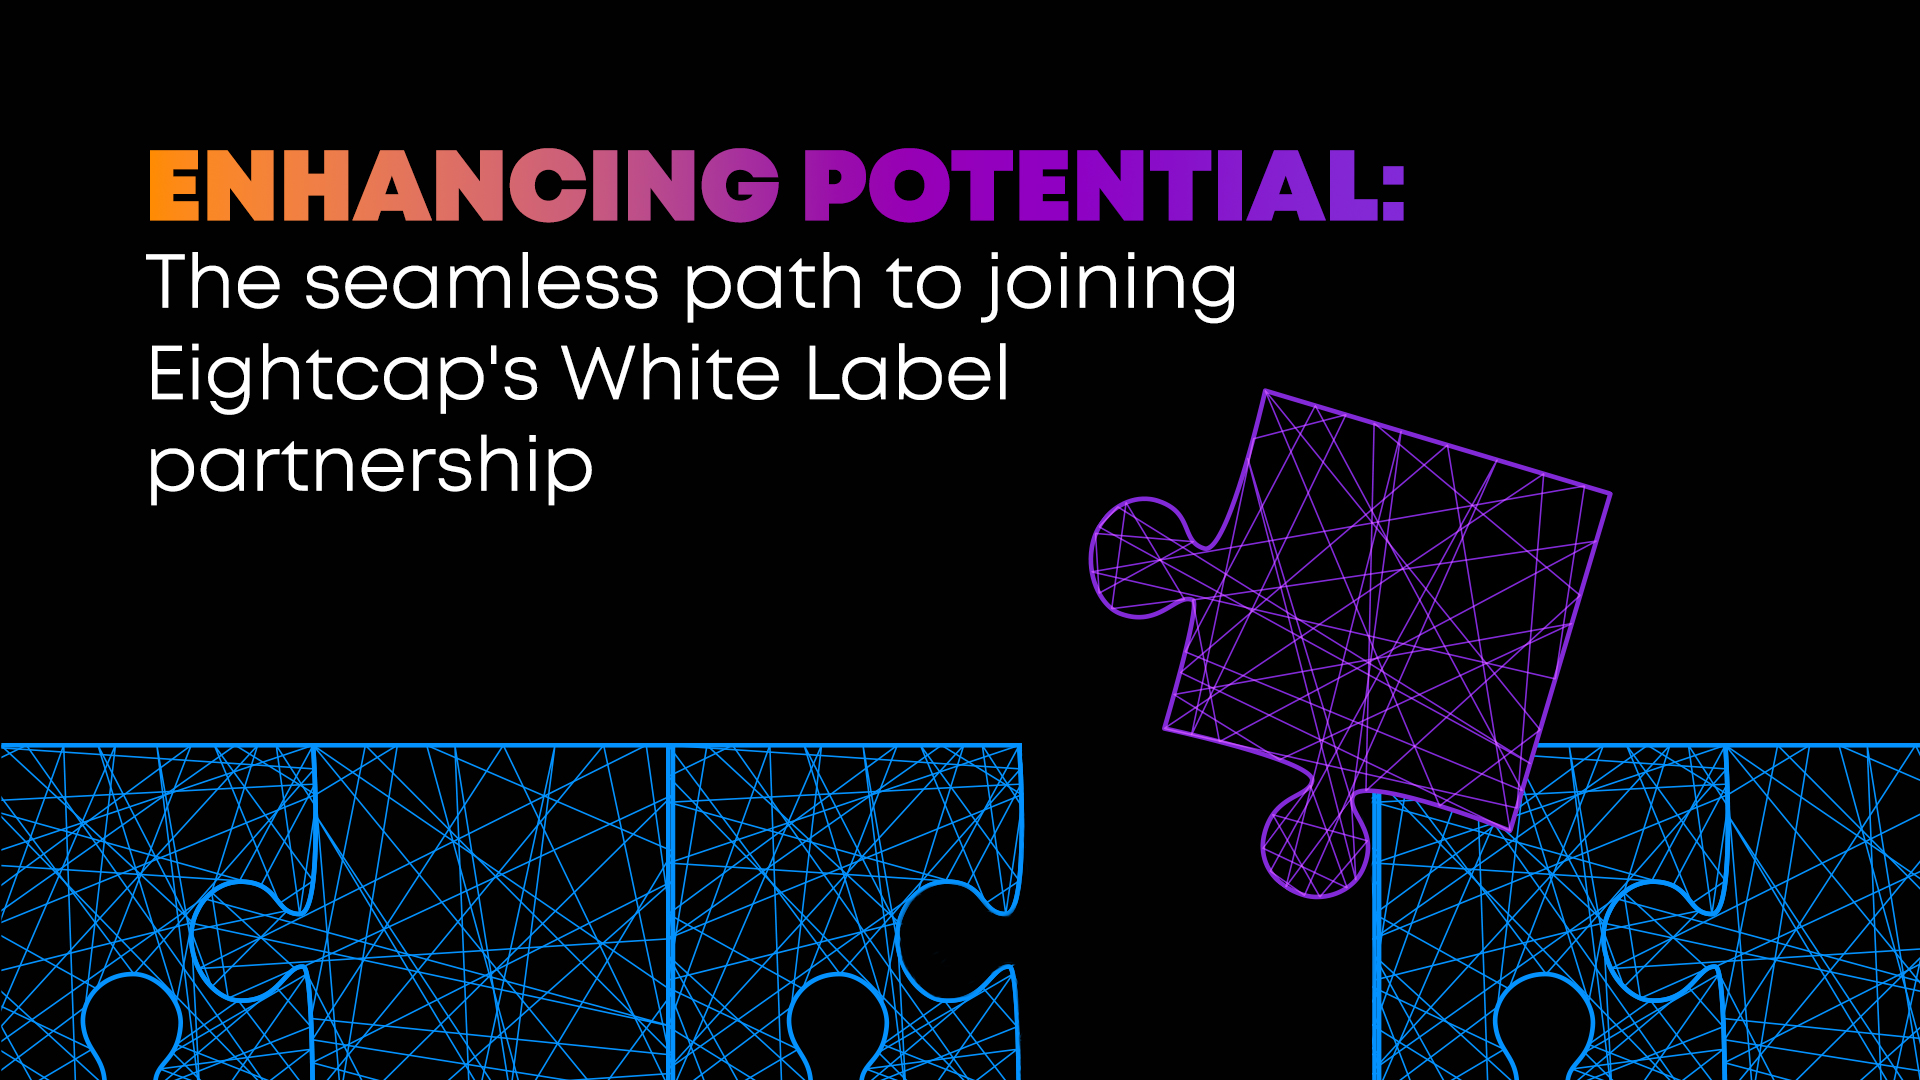 Enhancing Potential: The Seamless Path to Joining Eightcap’s White Label Partnership